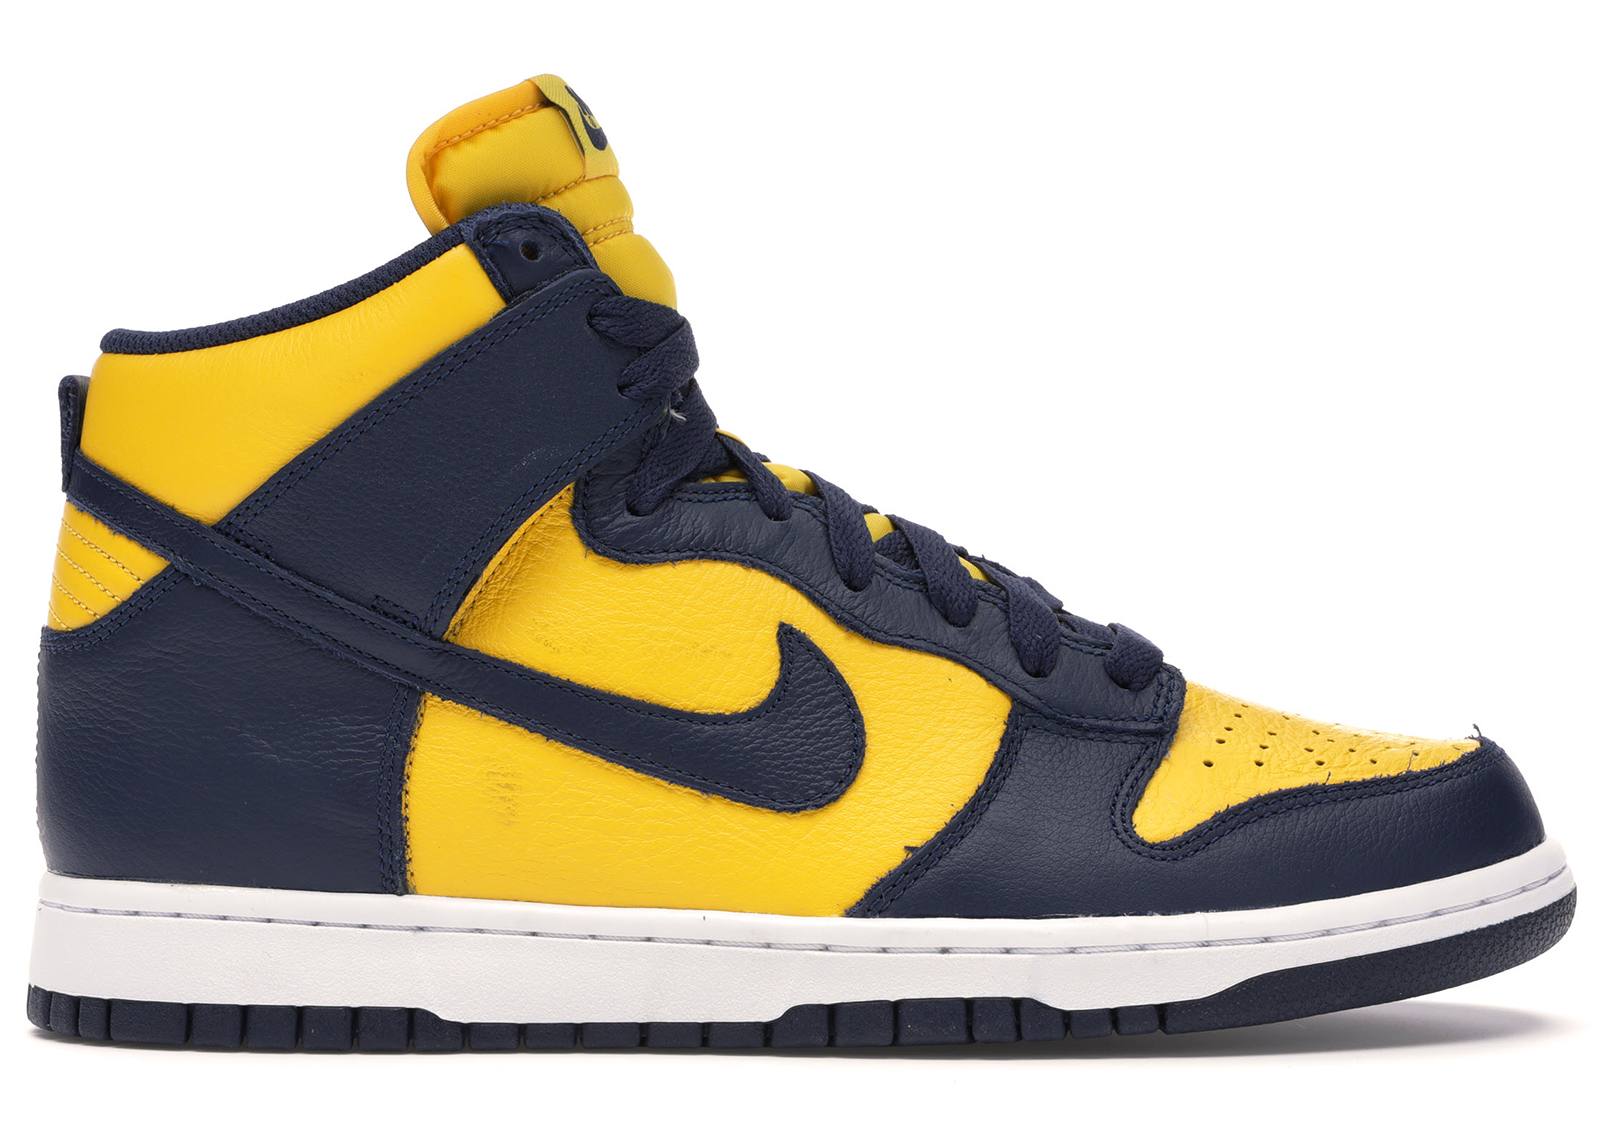 nike dunk high maize and blue stockx